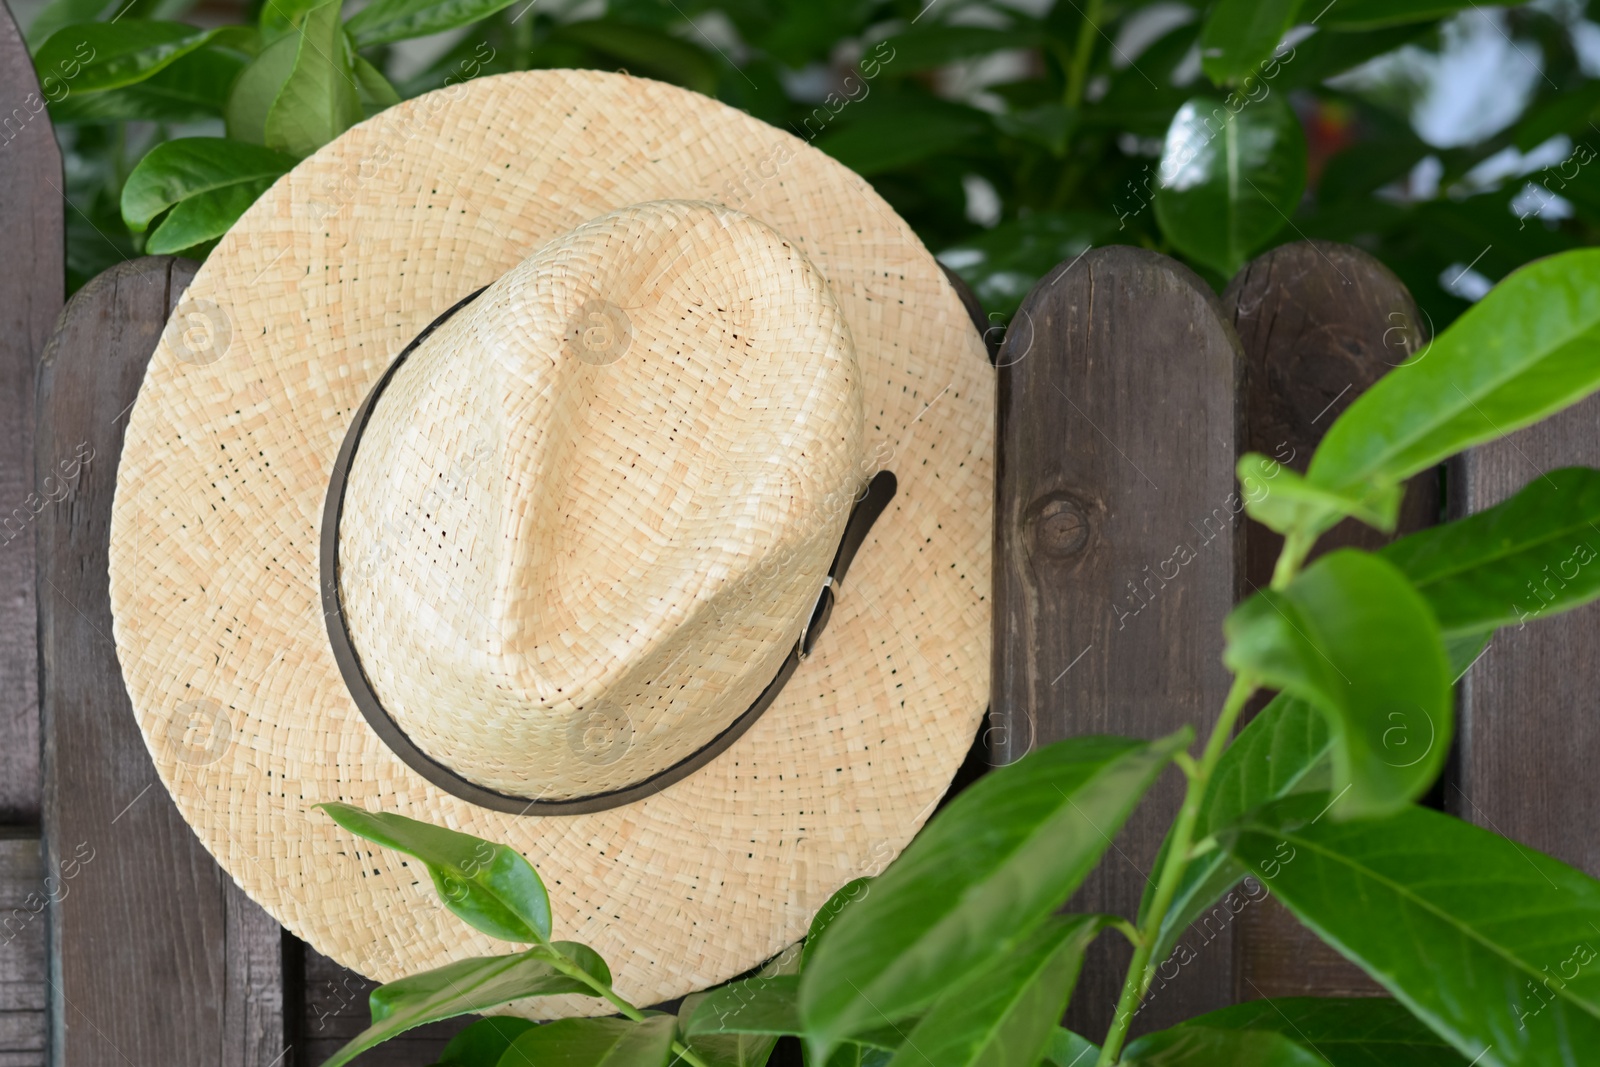 Photo of Stylish hat hanging on wooden fence. Beach accessory